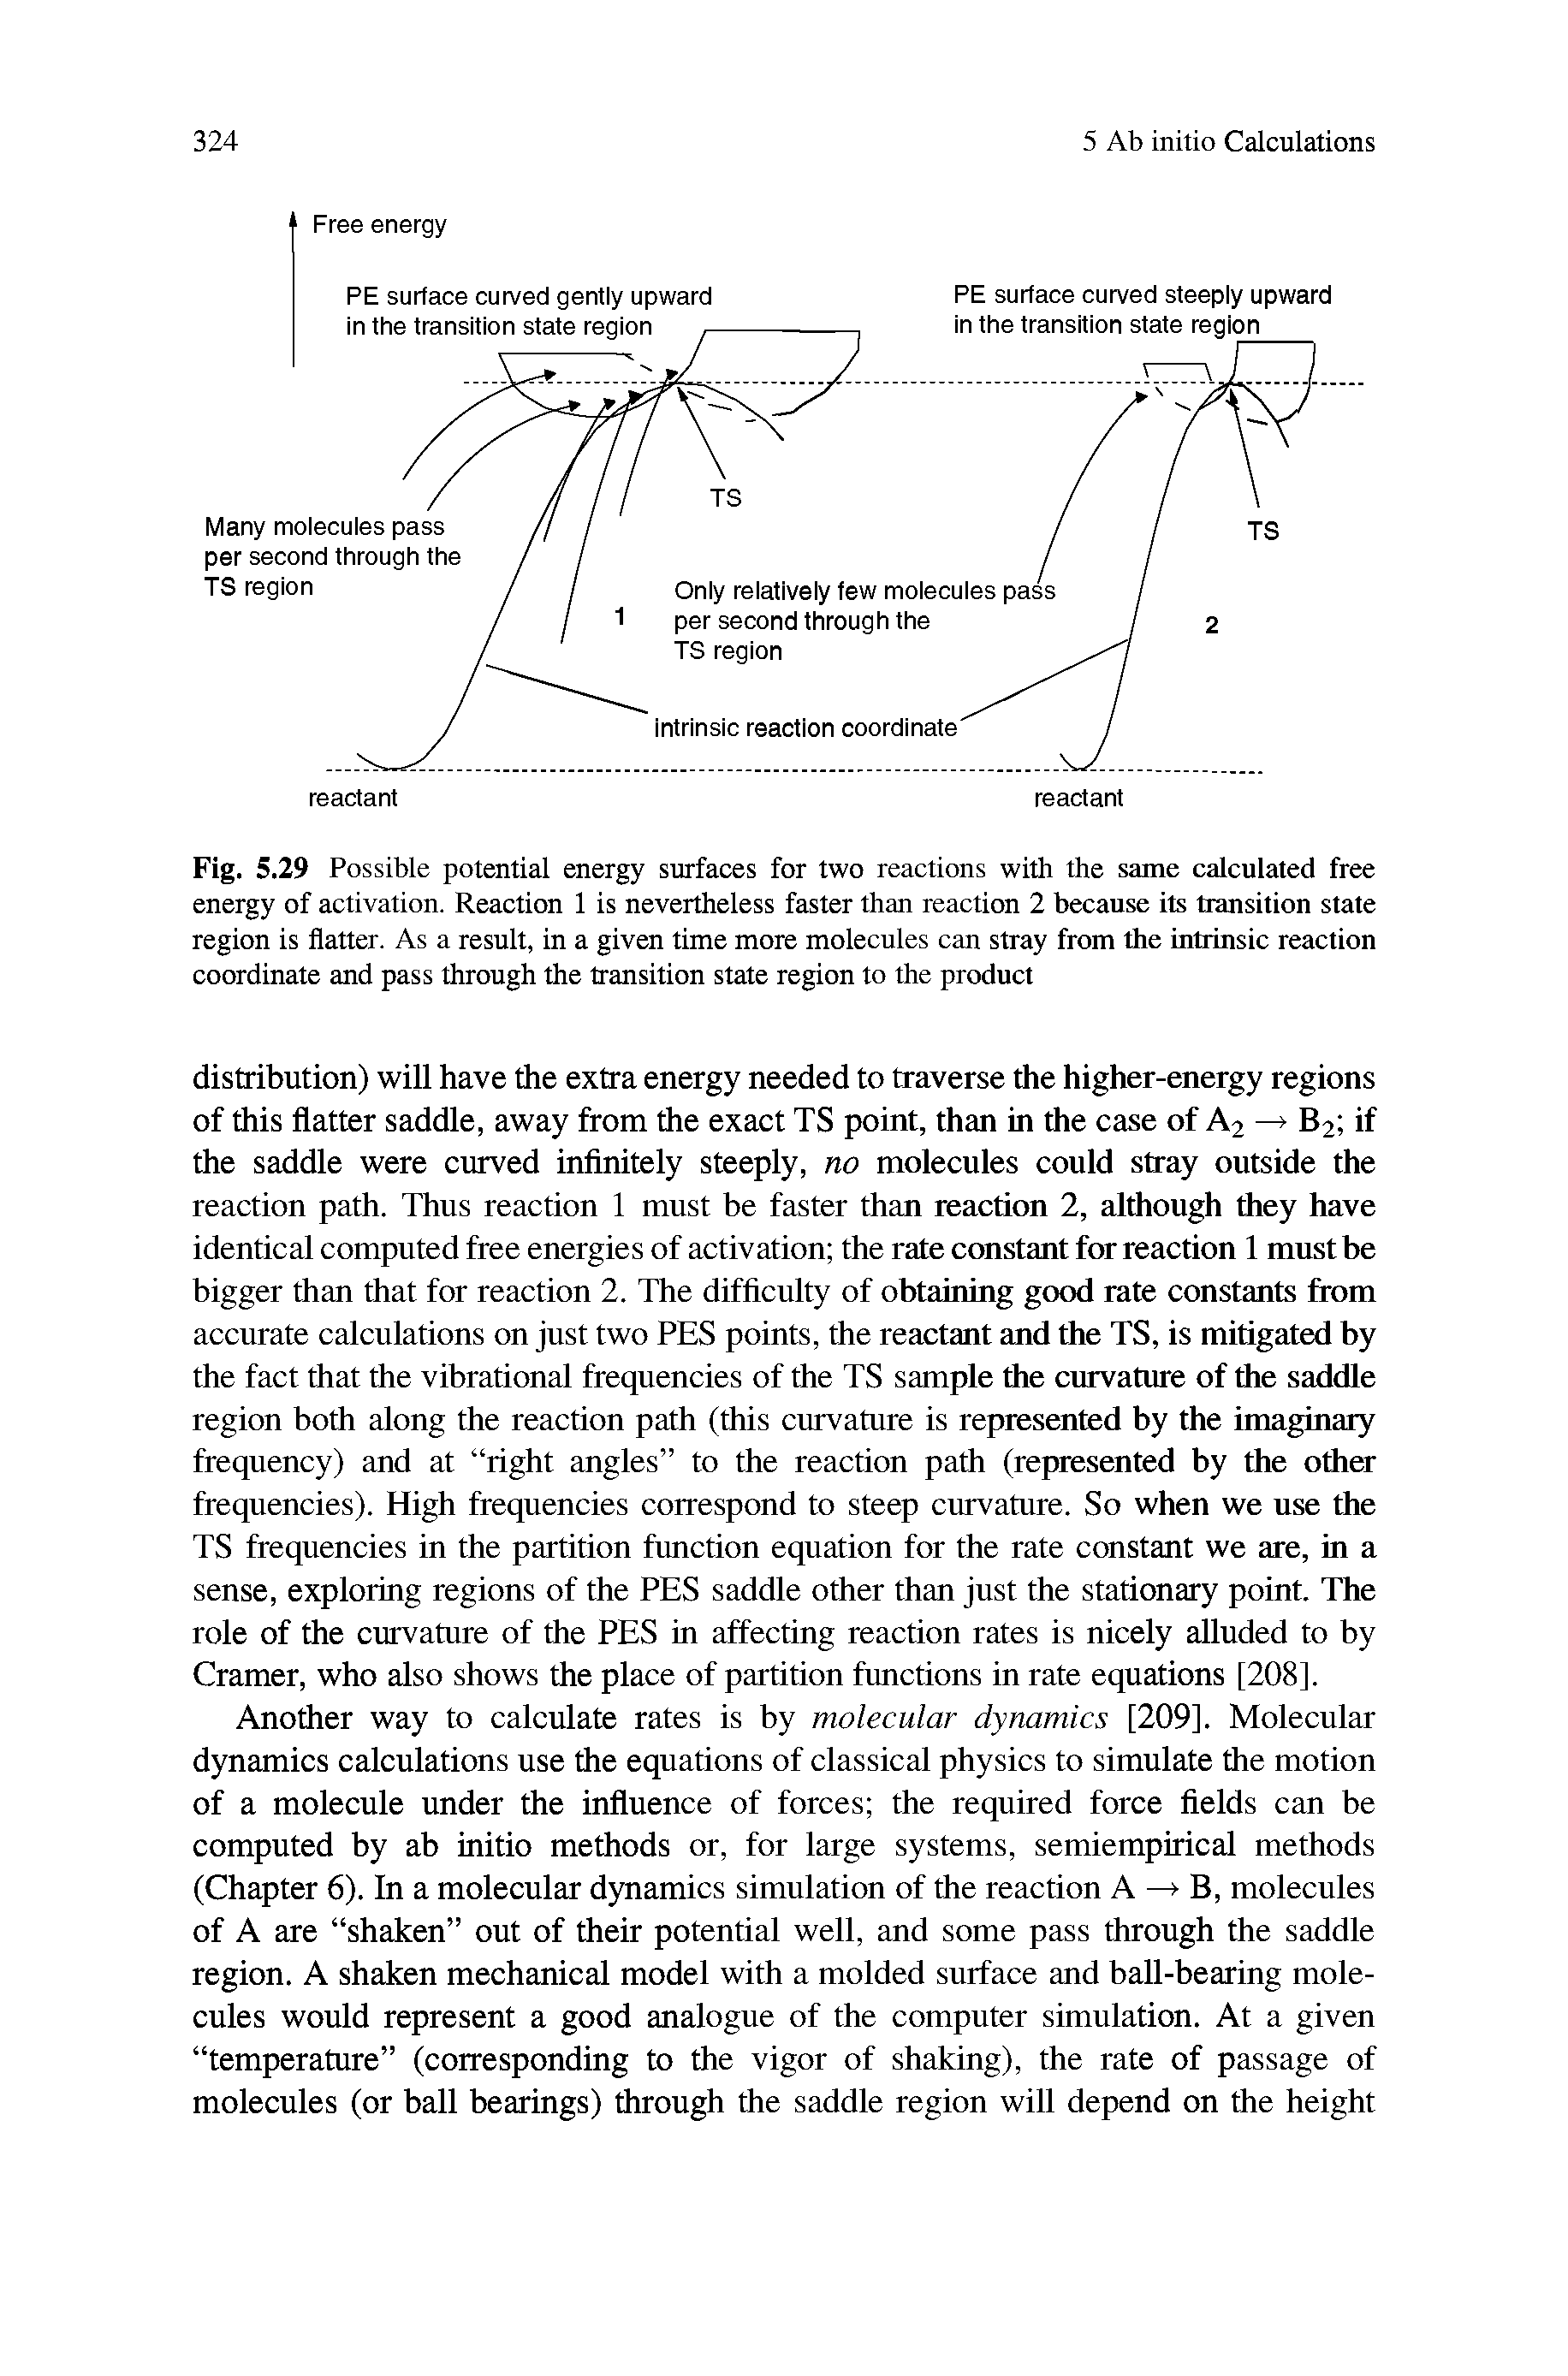 Fig. 5.29 Possible potential energy surfaces for two reactions with the same calculated free energy of activation. Reaction 1 is nevertheless faster than reaction 2 because its transition state region is flatter. As a result, in a given time more molecules can stray from the intrinsic reaction coordinate and pass through the transition state region to the product...